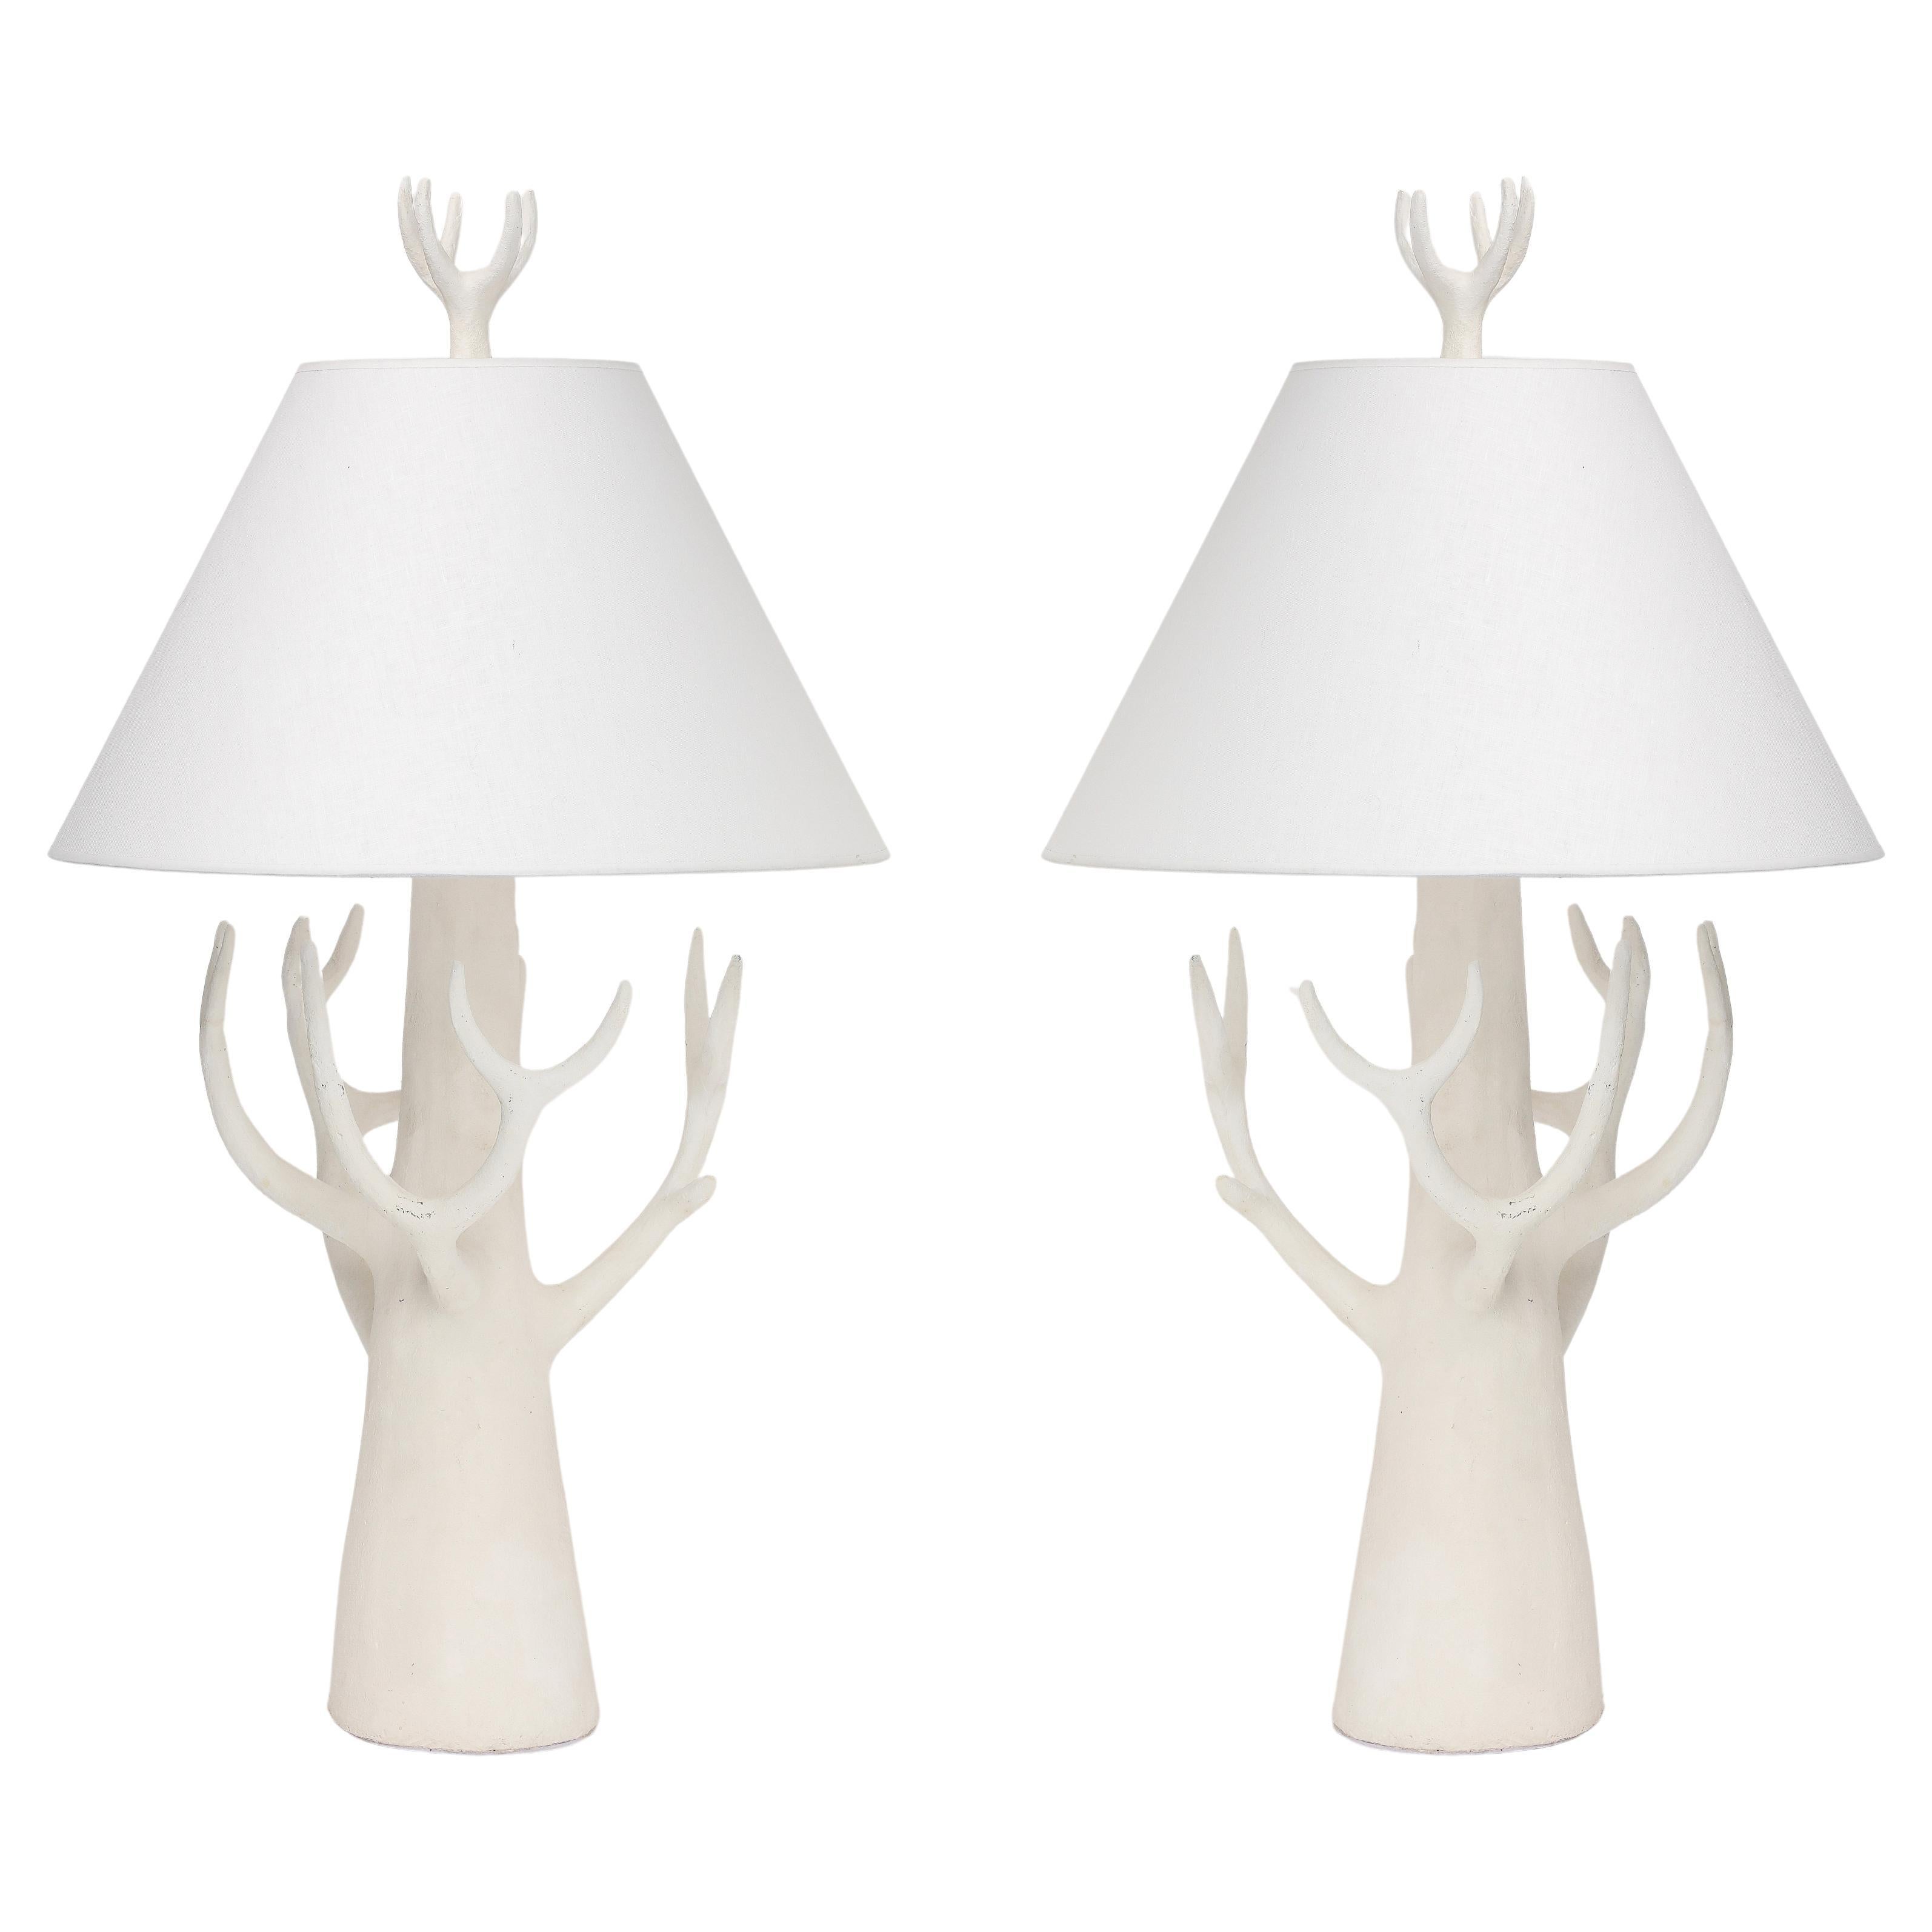 Jacques Darbaud Ceramic Table Lamps "Tree" For Sale